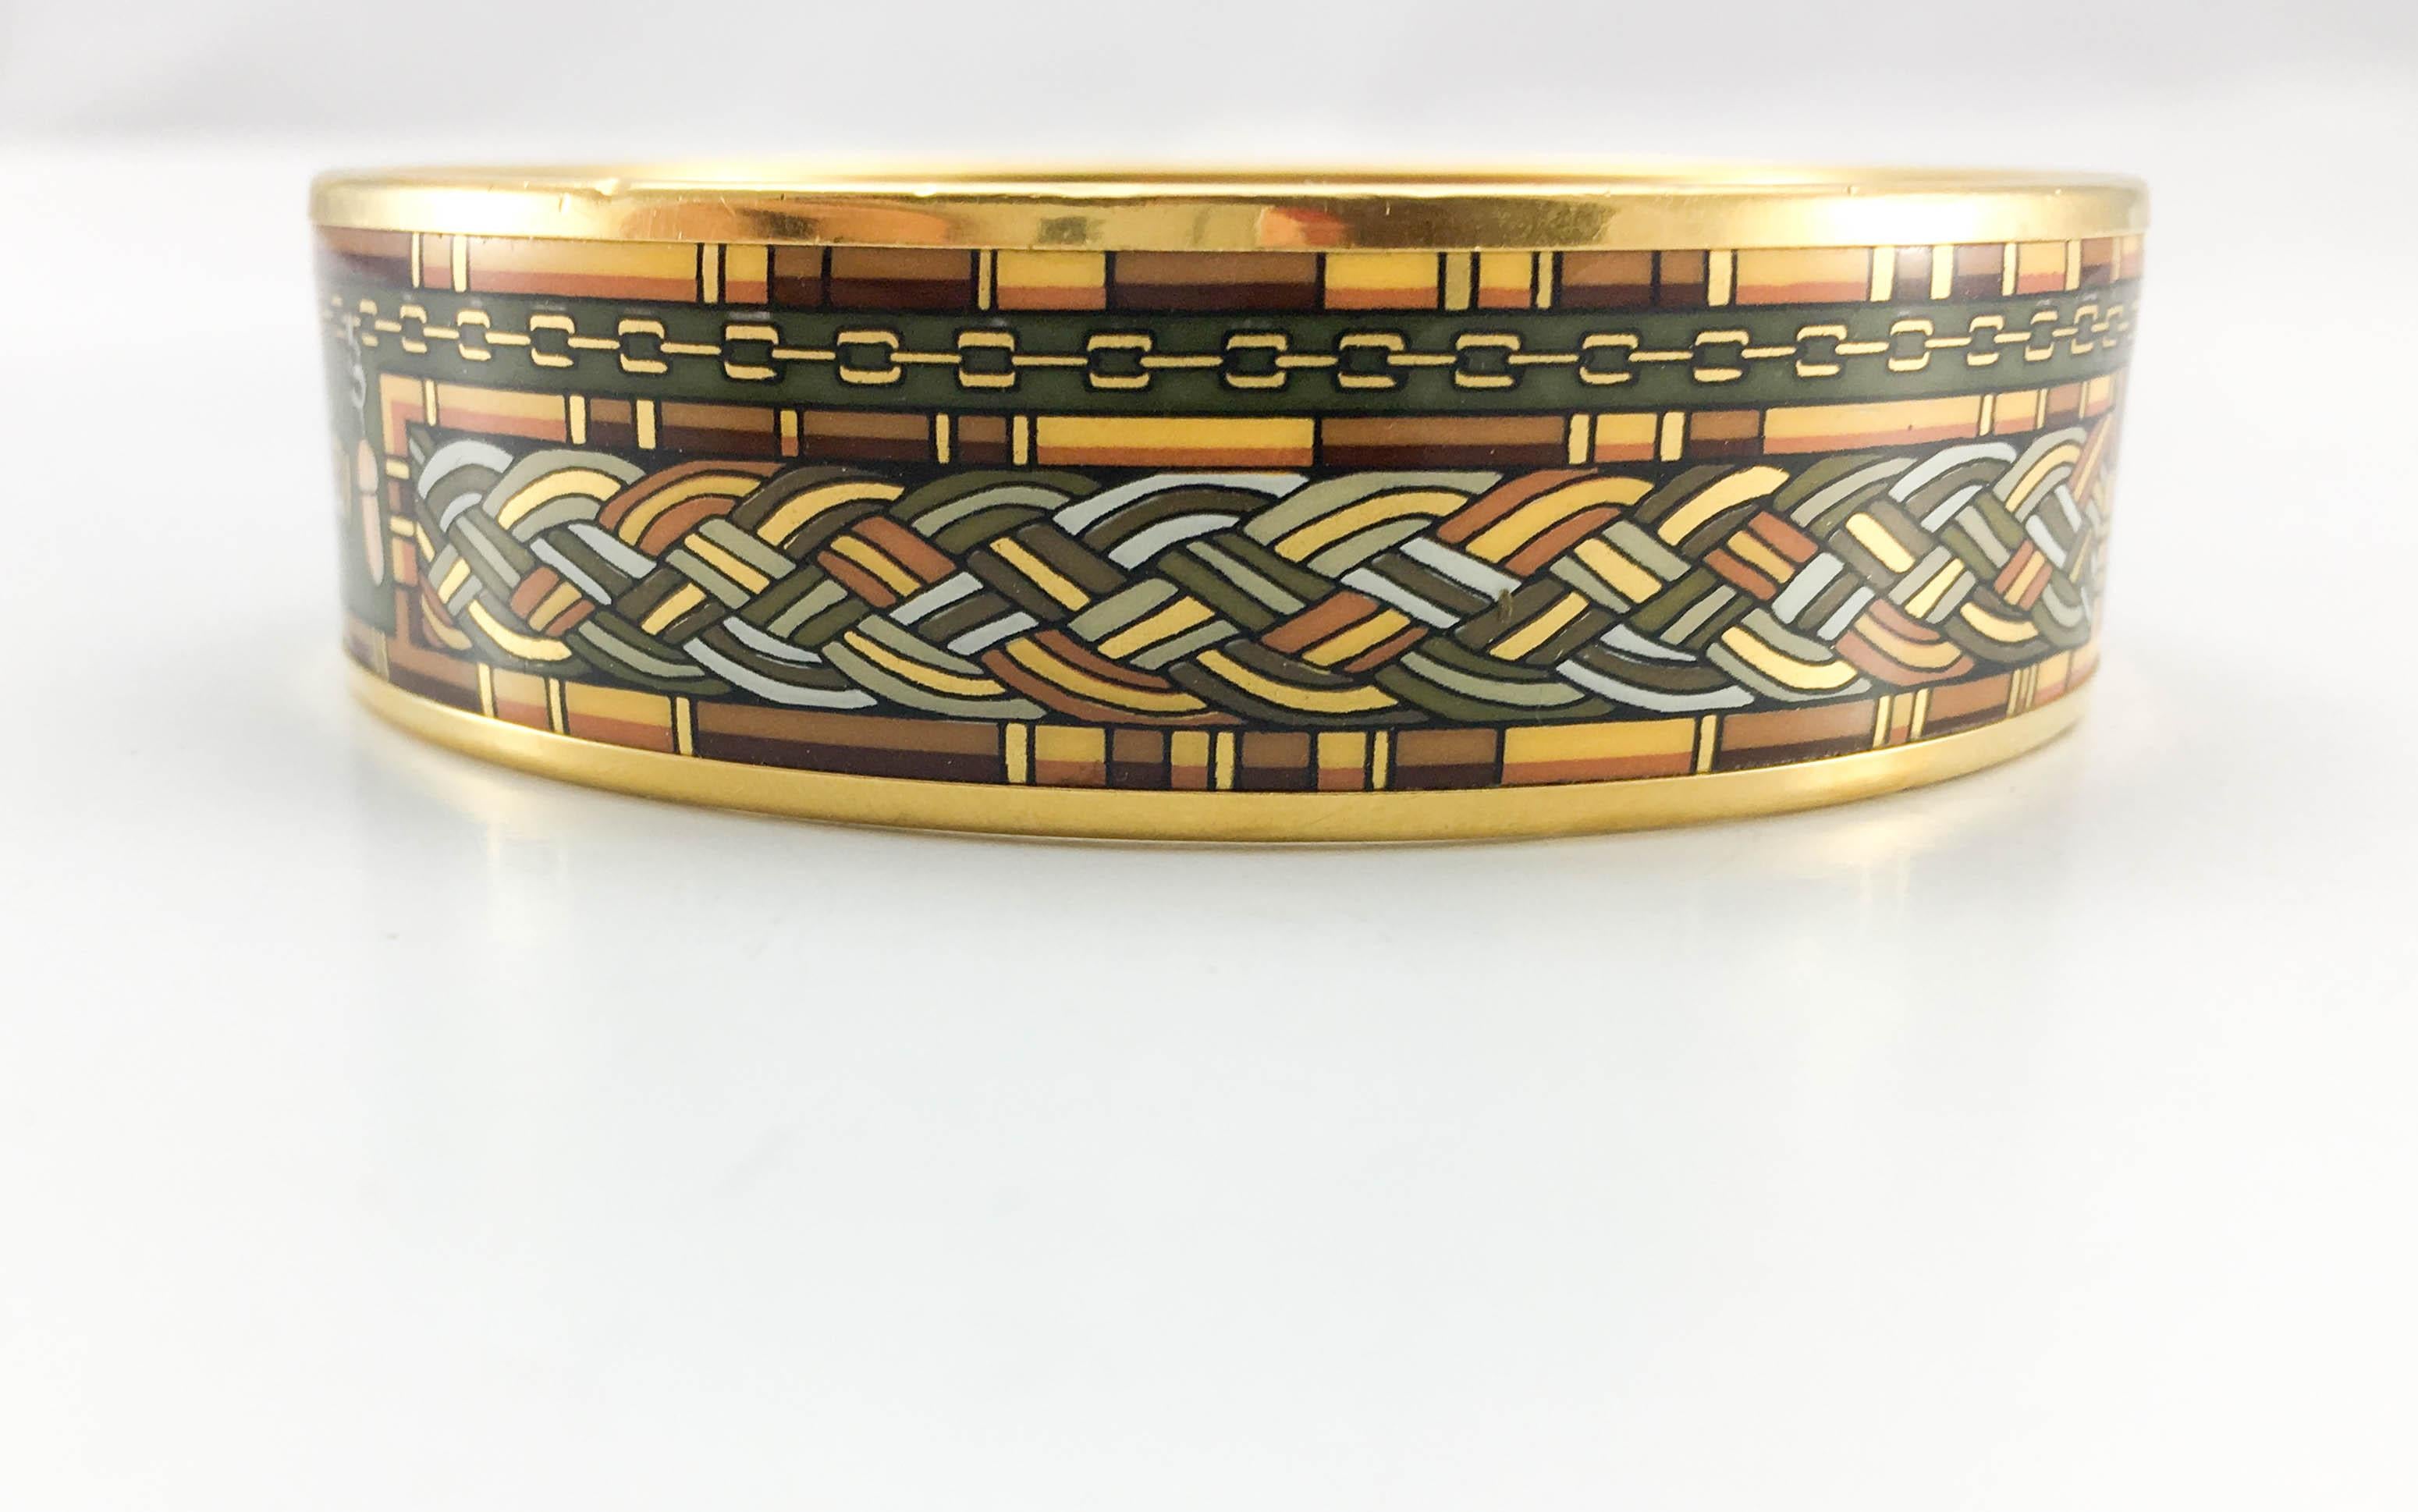 Hermes ‘Sewing Kit’ Enamel Bangle. This beautiful bangle by Hermes features a very intricated design with a sewing kit motif. Enamelled, it brings a very elegant colour palette of greens, golden and browns. Made for the chic and stylish.

Label /